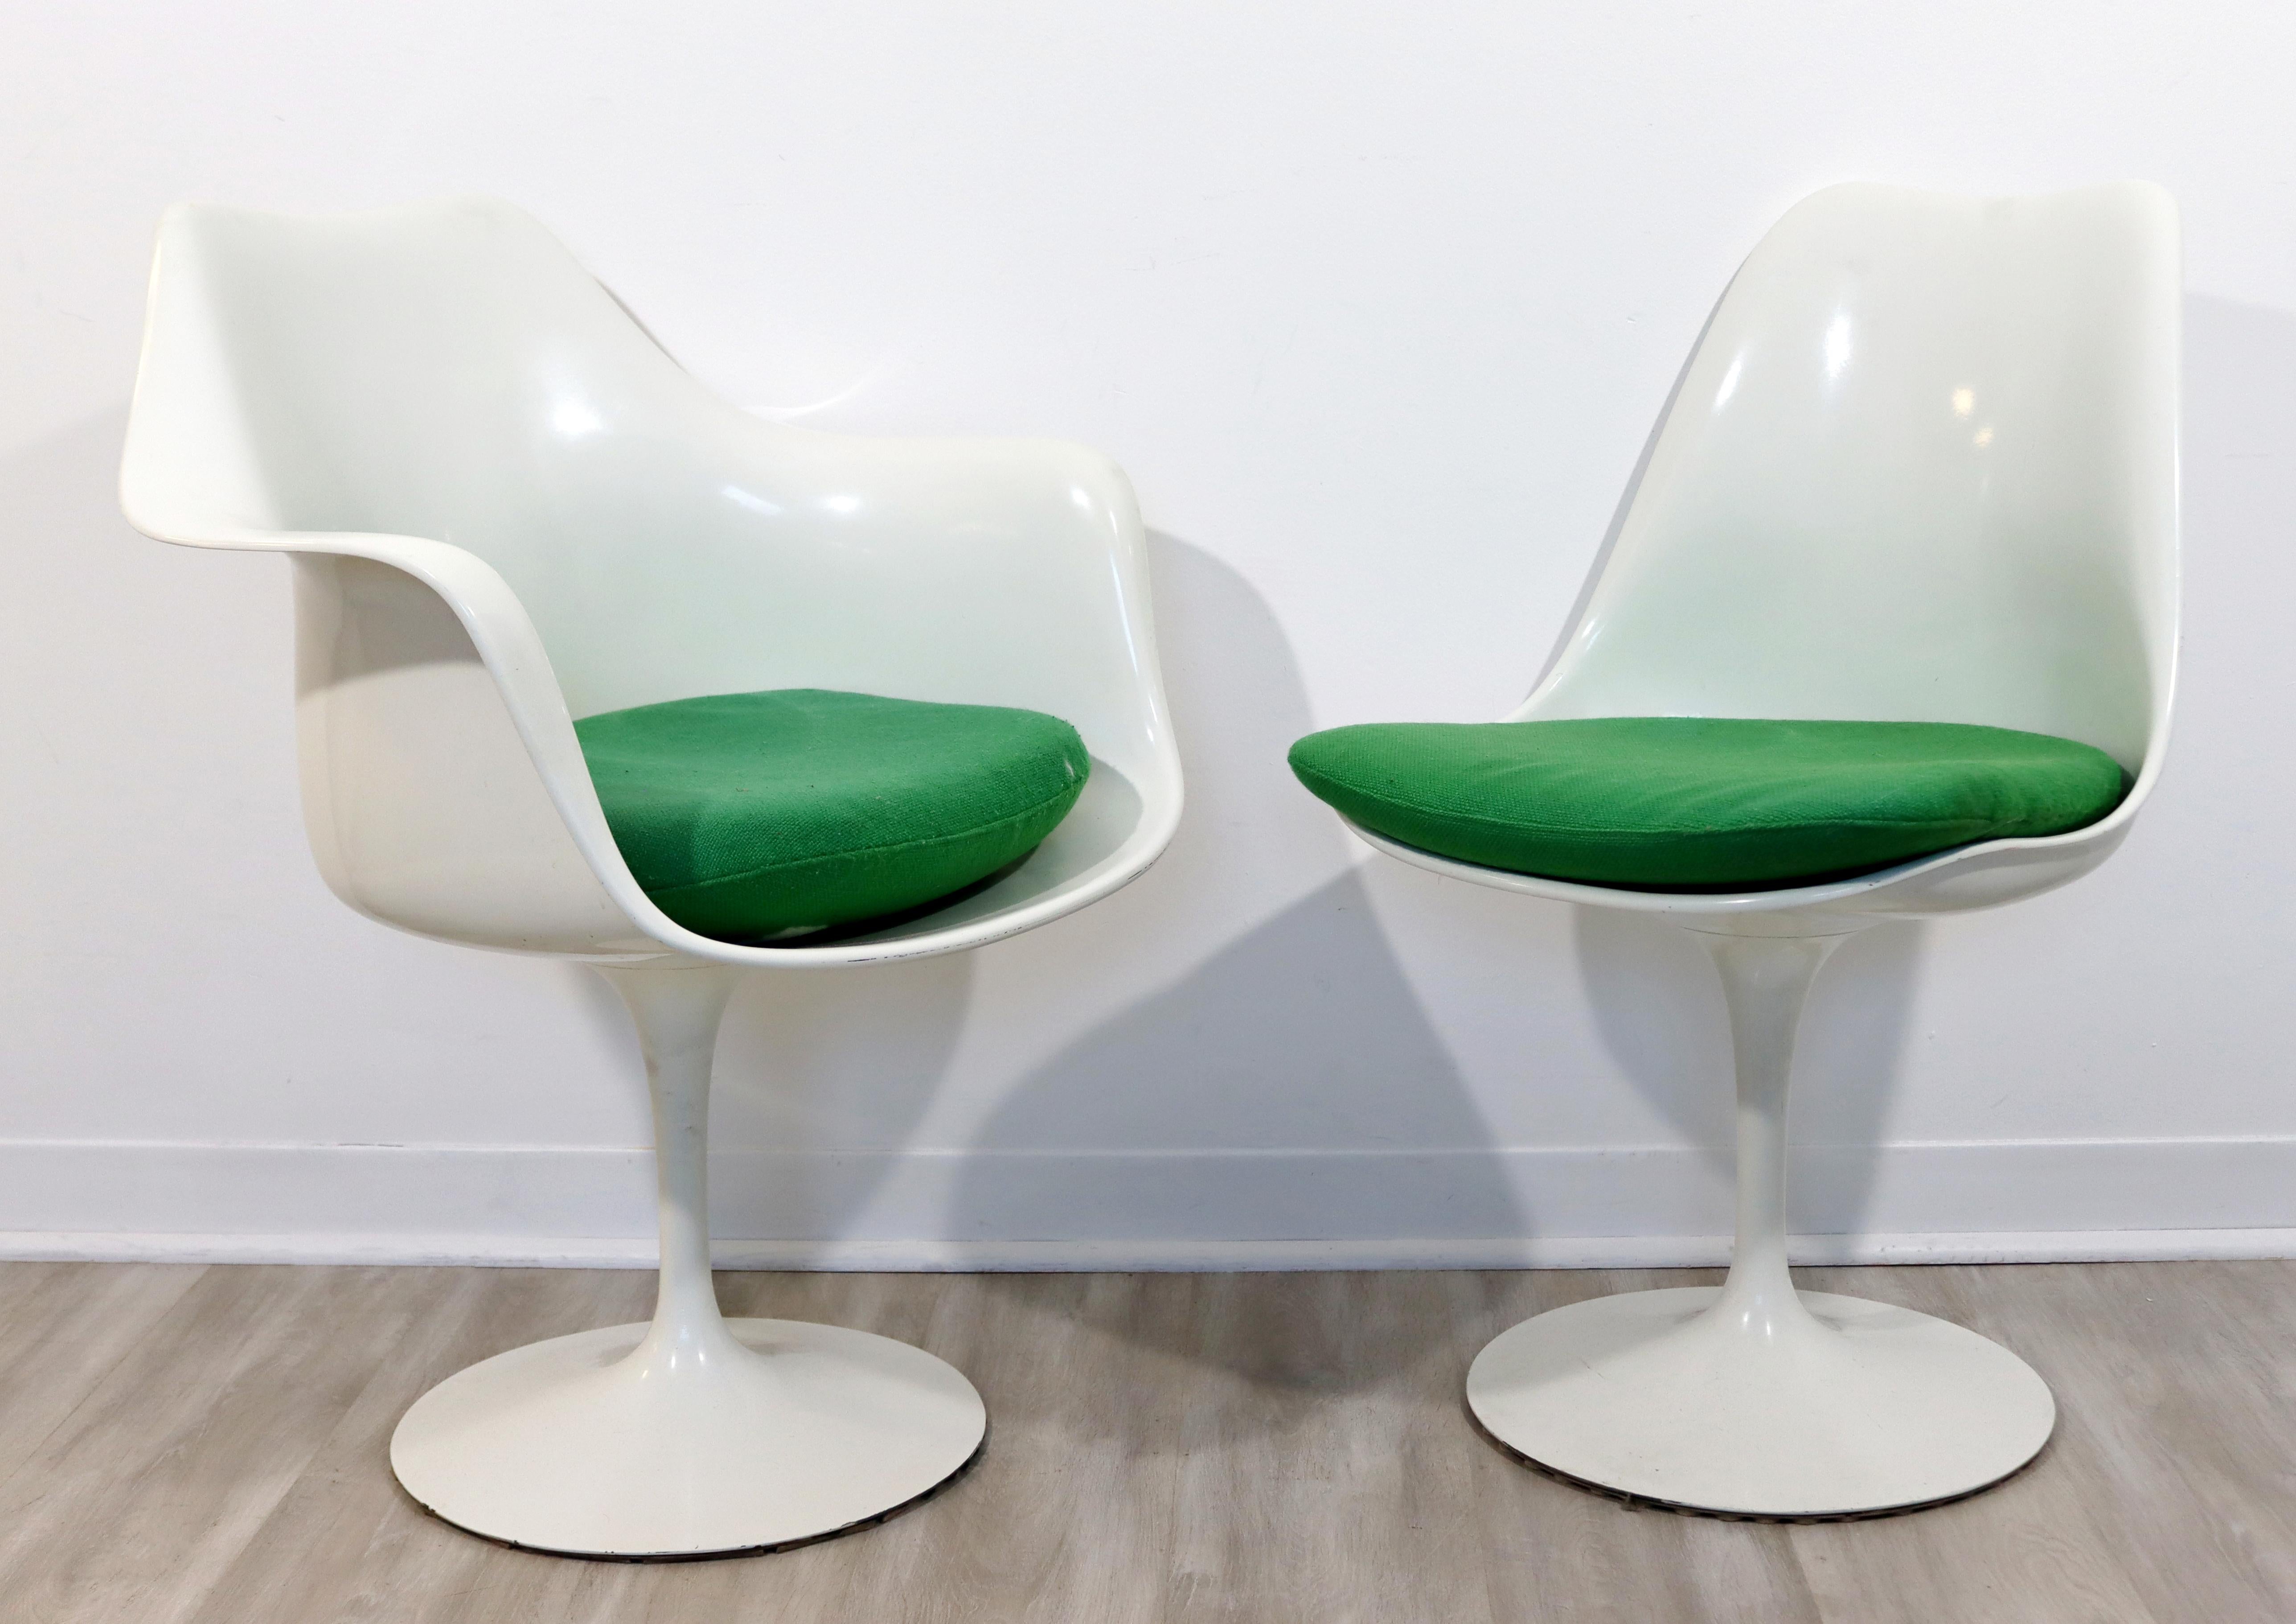 For your consideration is an original, set of six, Tulip dining chairs, including four side and two arm, by Eero Saarinen for Knoll, circa the 1960s. In excellent vintage condition. The dimensions are 19.5